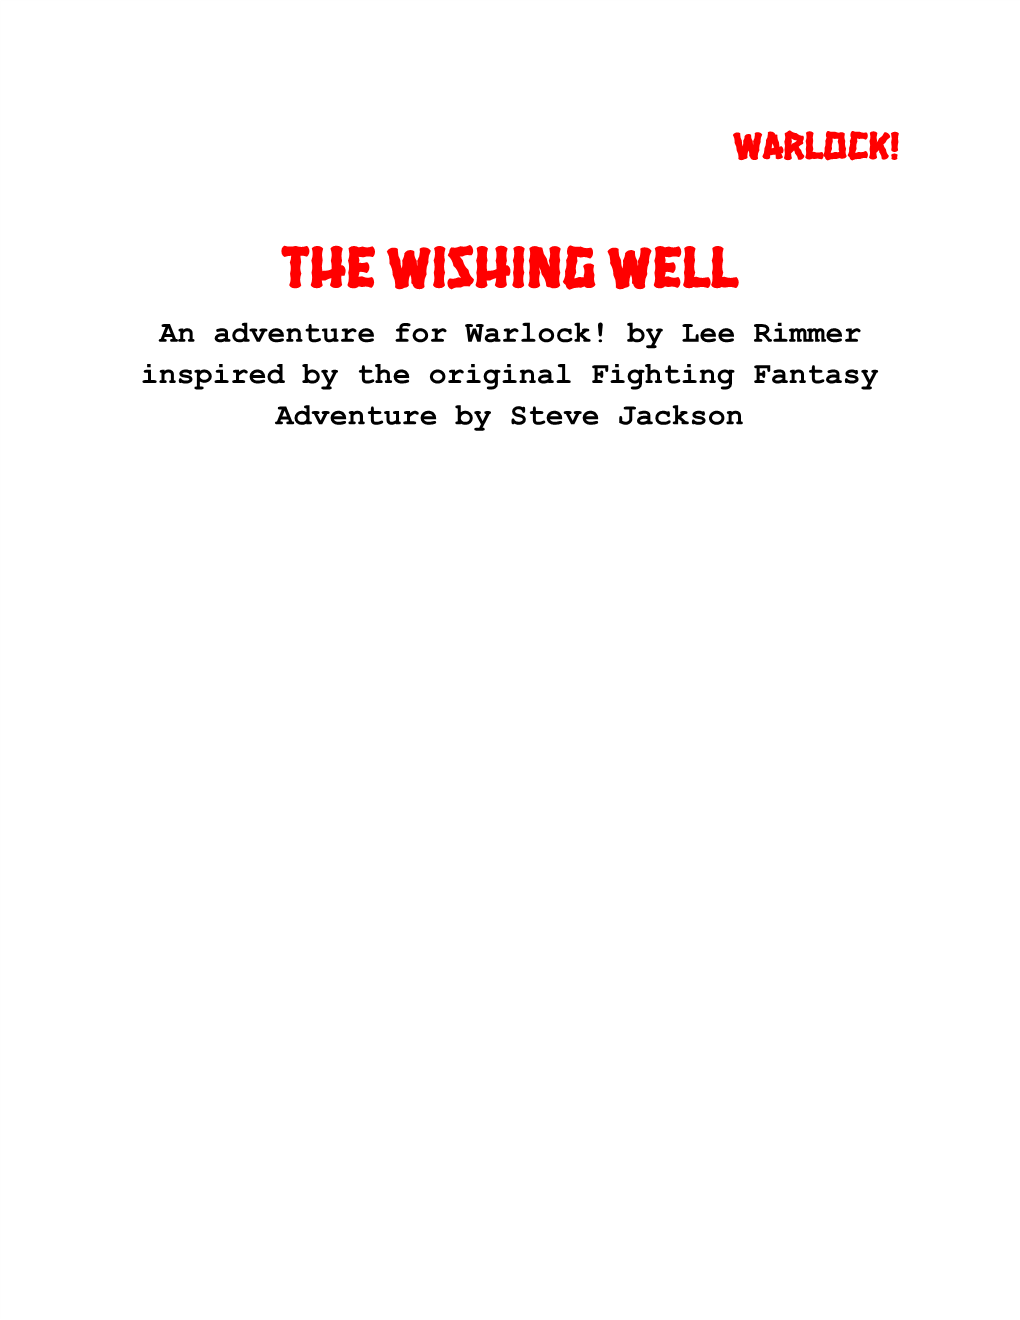 The Wishing Well an Adventure for Warlock! by Lee Rimmer Inspired by the Original Fighting Fantasy Adventure by Steve Jackson